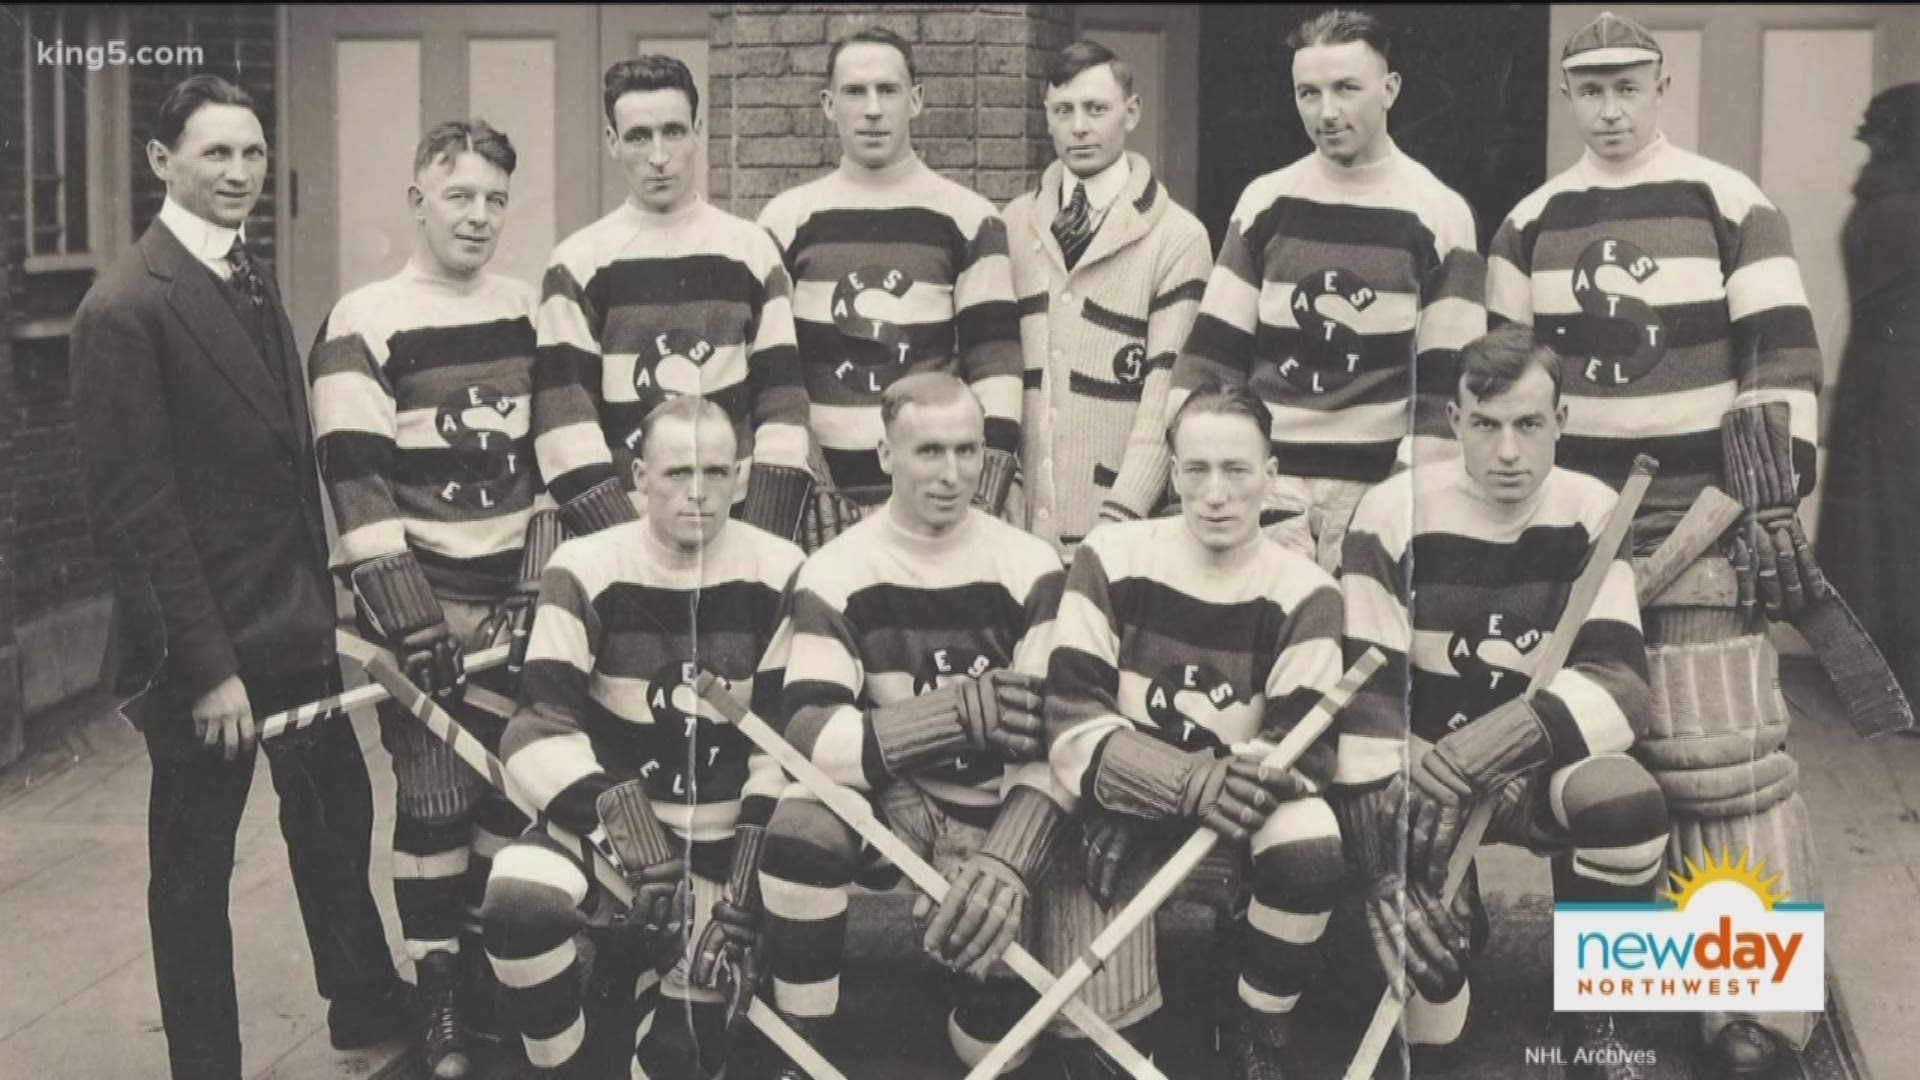 Did you know a team from Seattle won the first ever Stanley Cup in 1917?